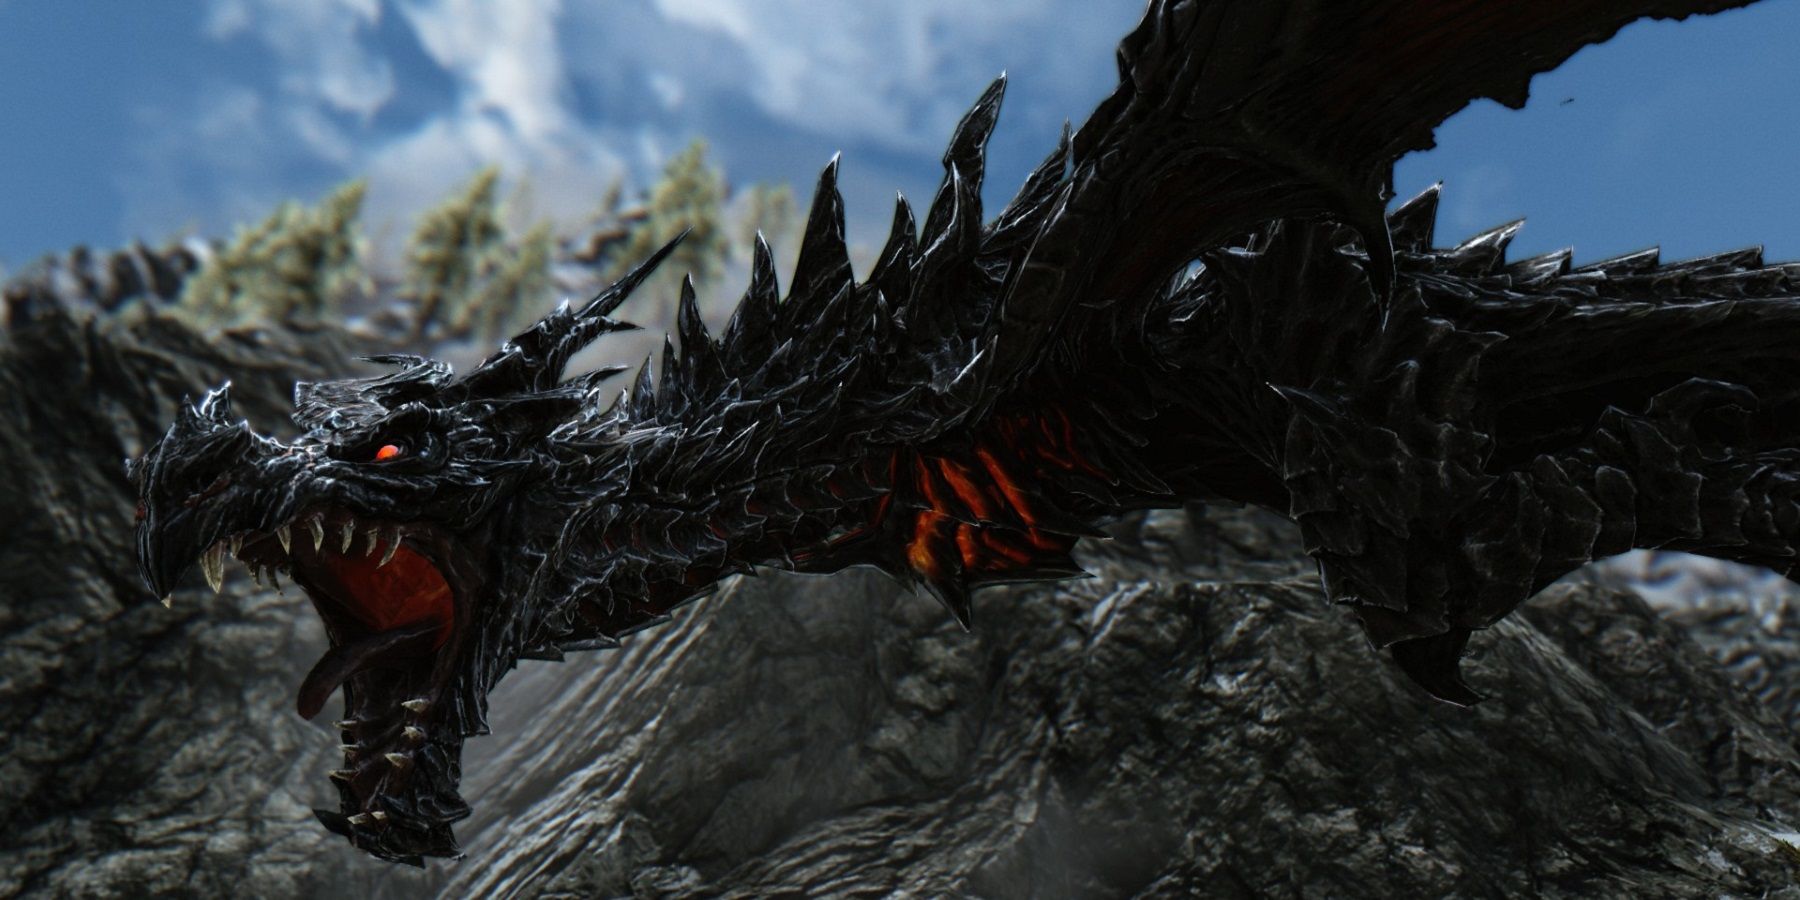 A close-up of a very dark looking Skyrim dragon.